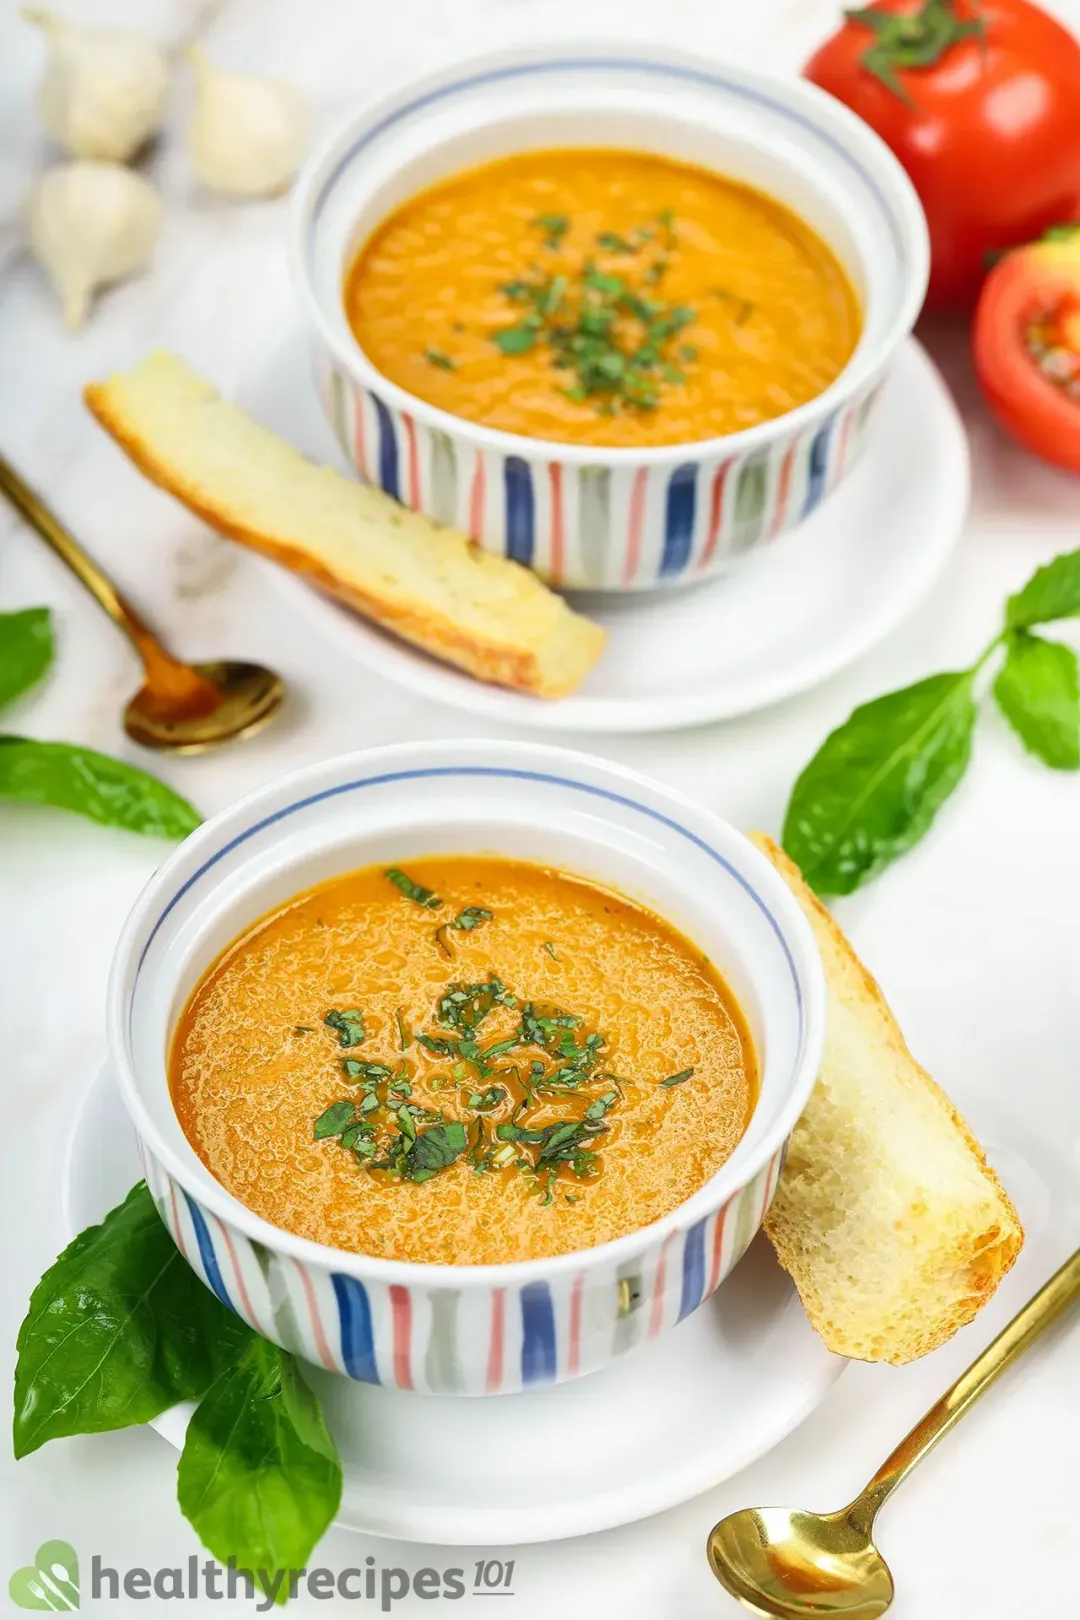 Can I Use Canned Tomatoes for Tomato basil Soup